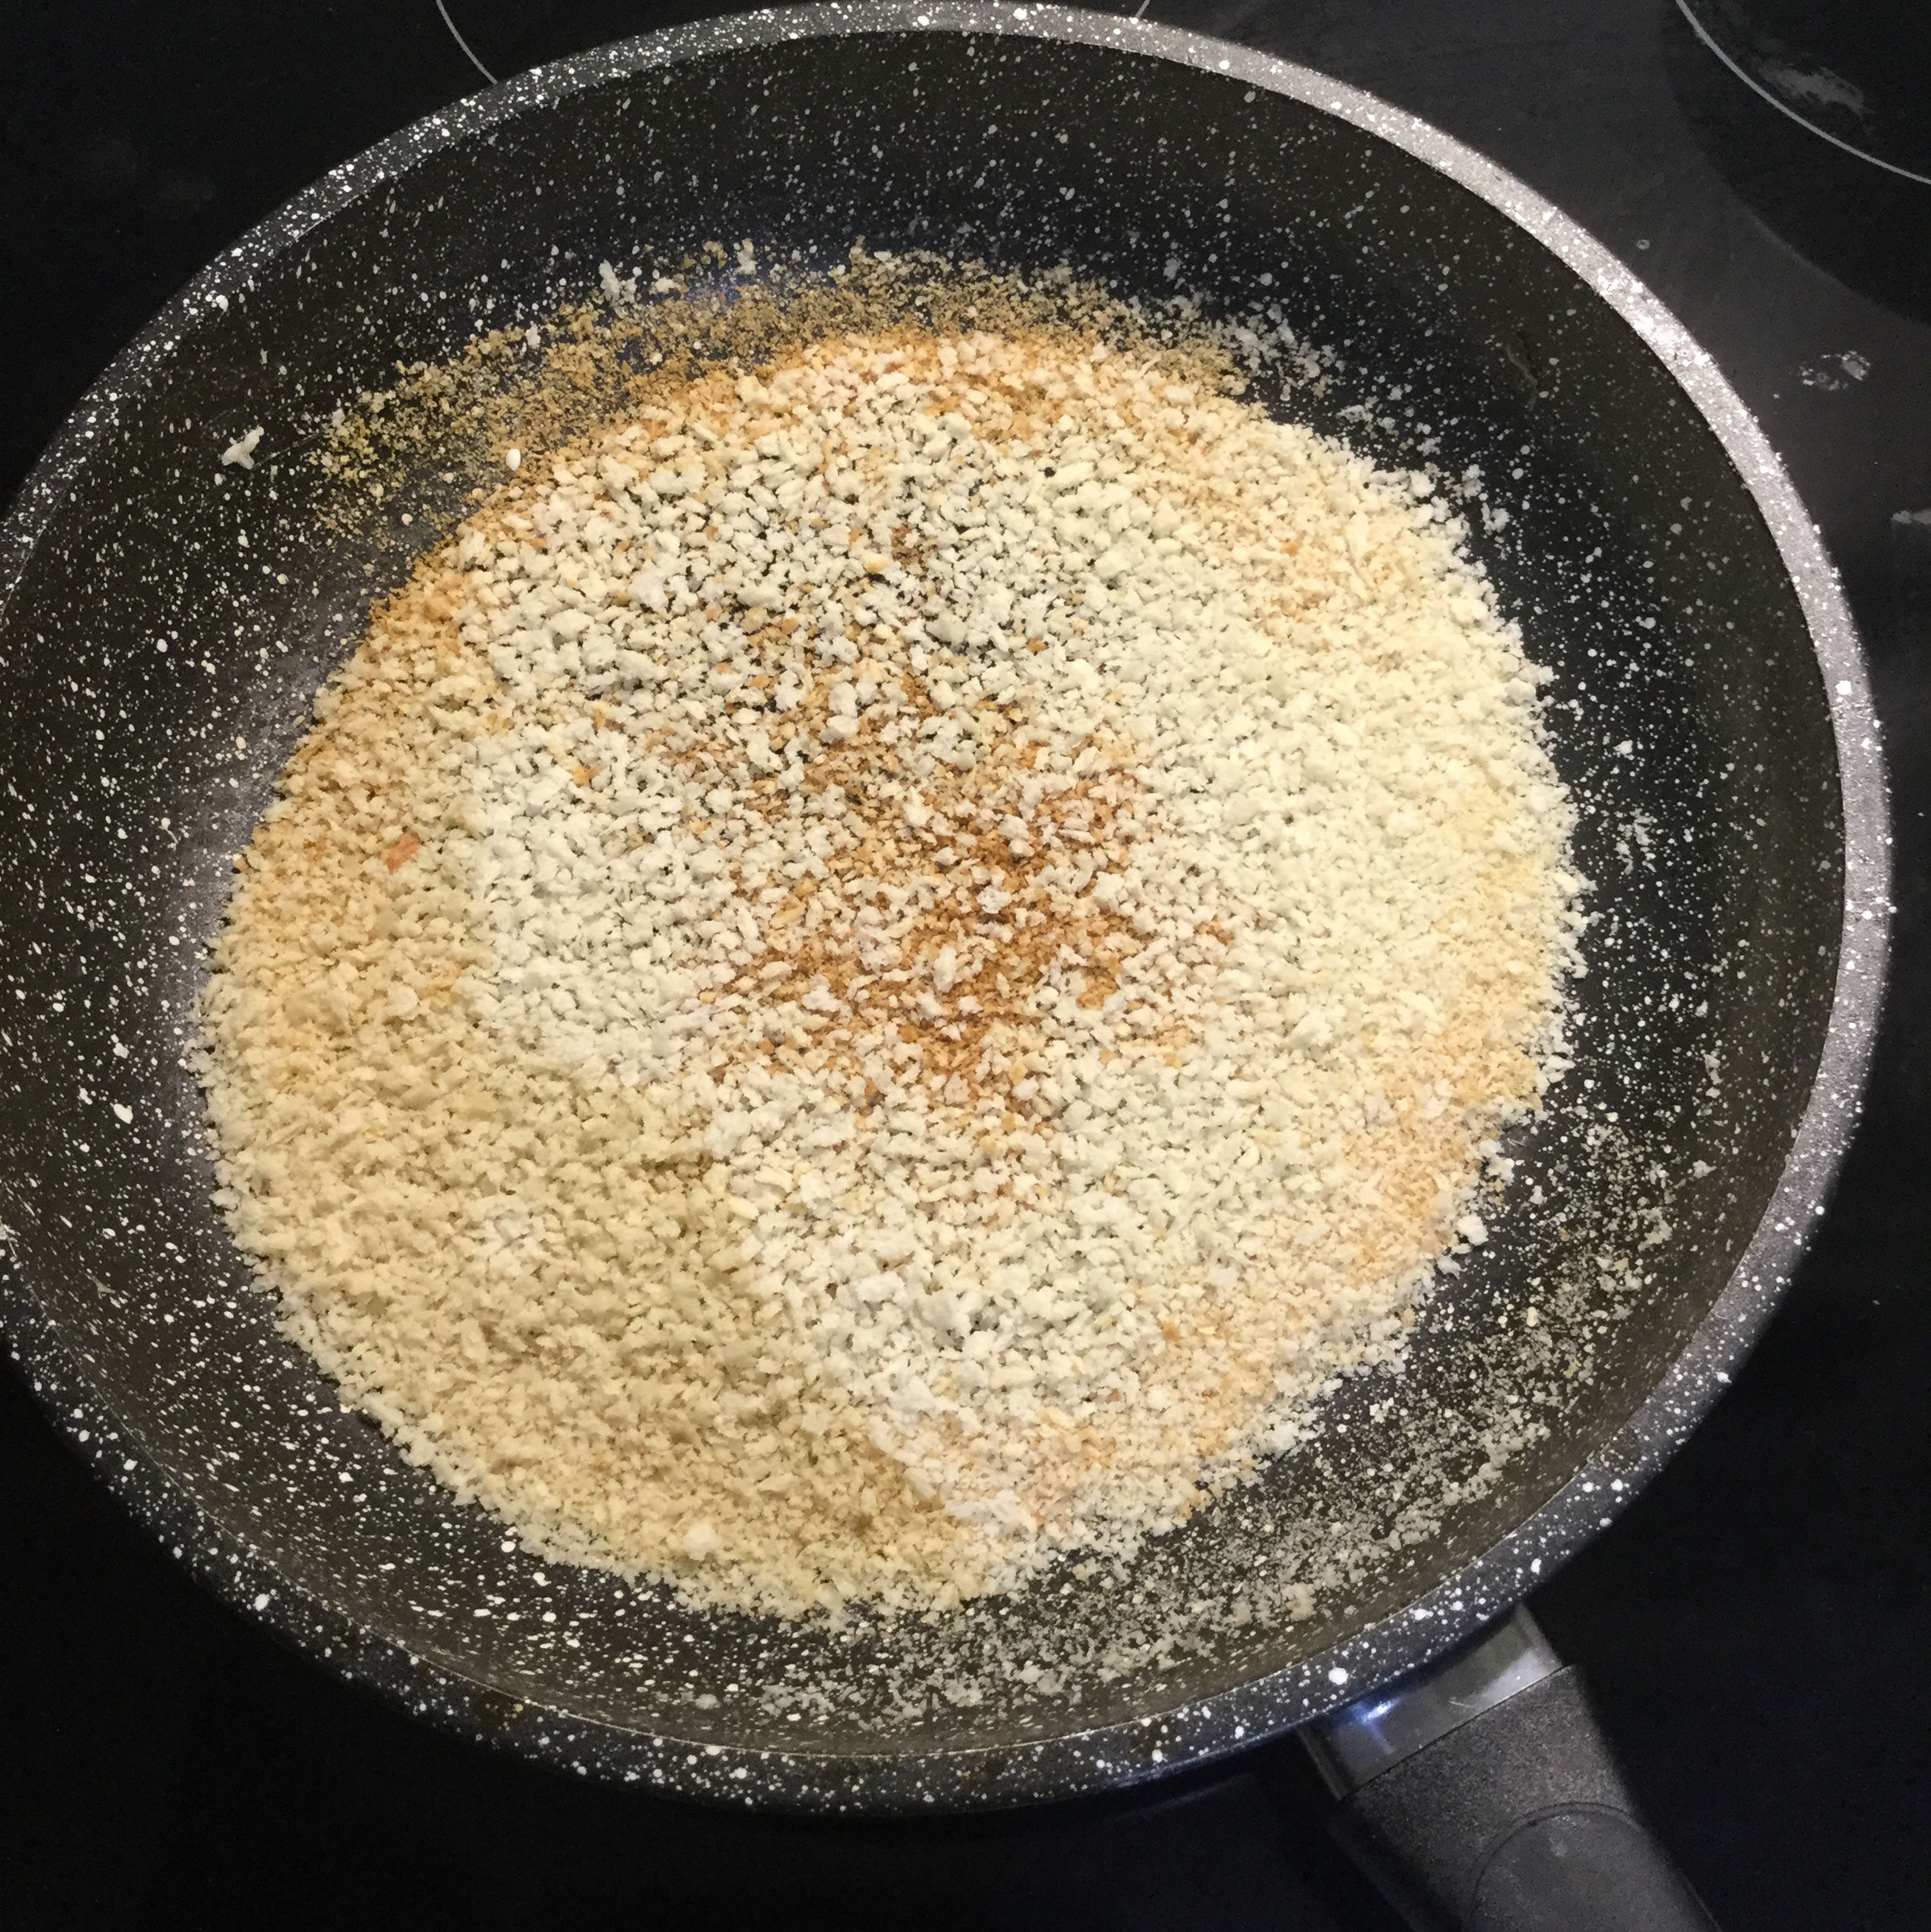 In the meantime, prepare the panko breadcrumbs. Add to frying pan, cook and stir until golden brown.